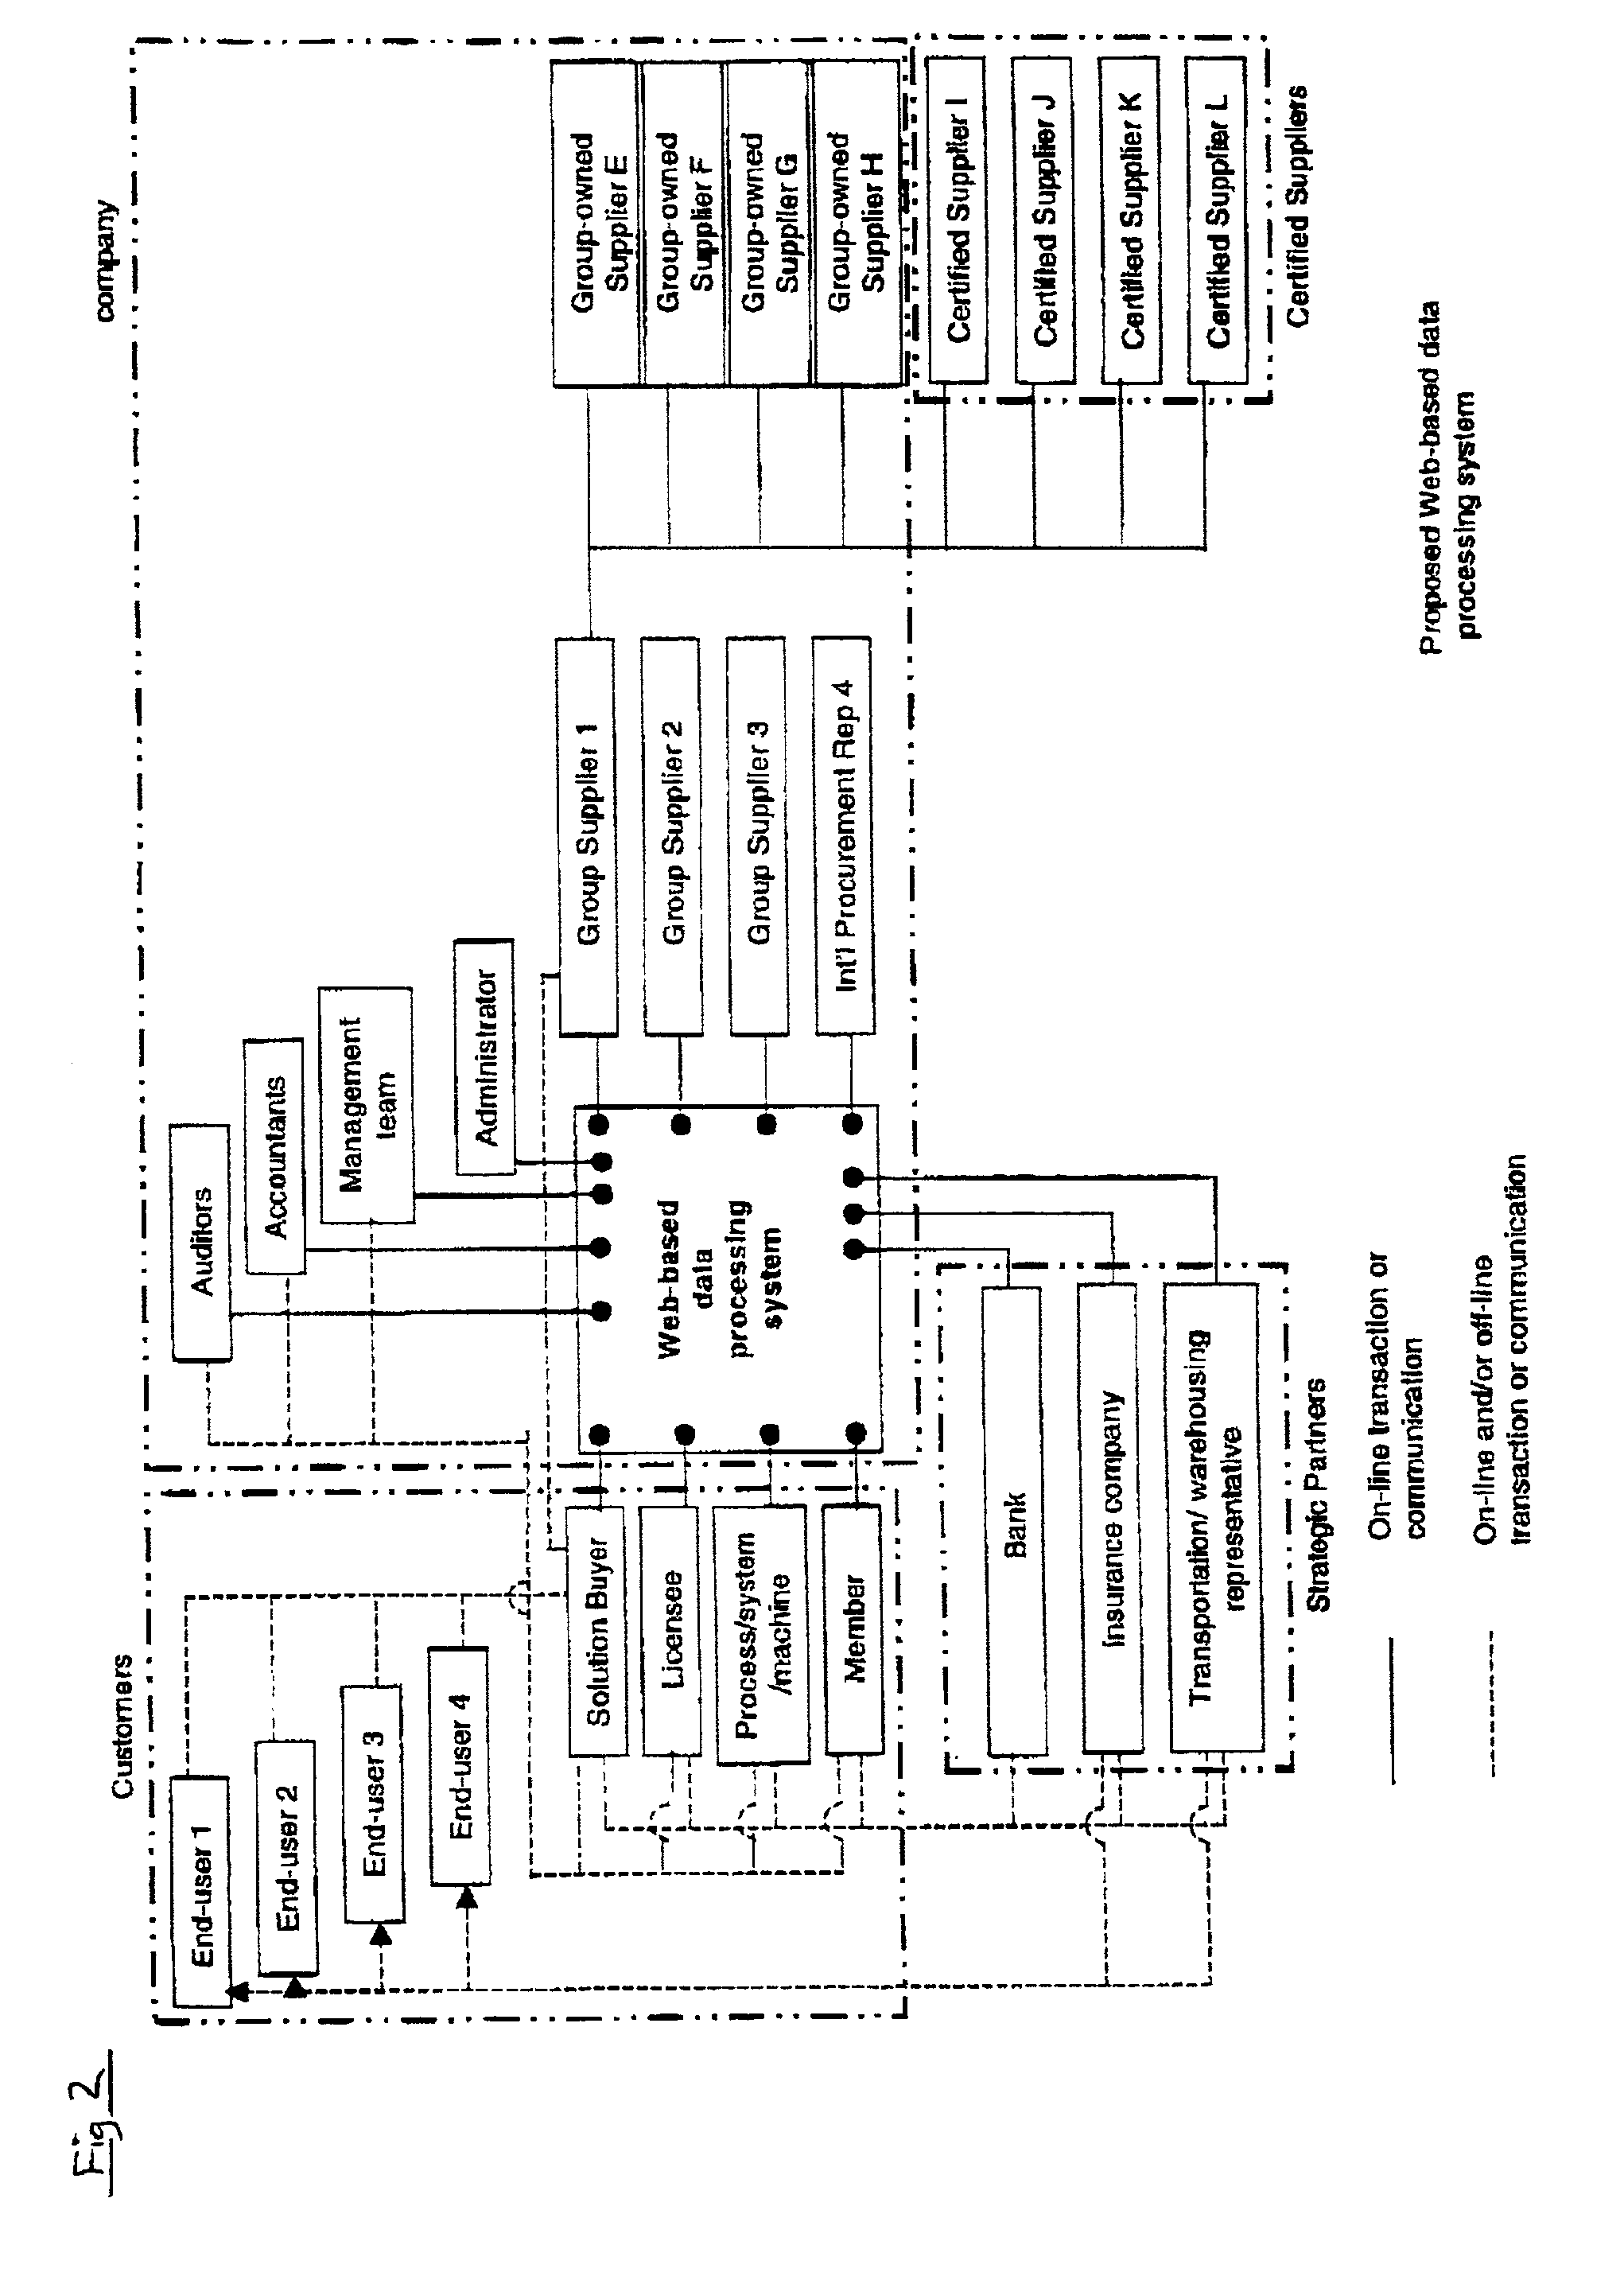 Data processing system for implementing an exchange